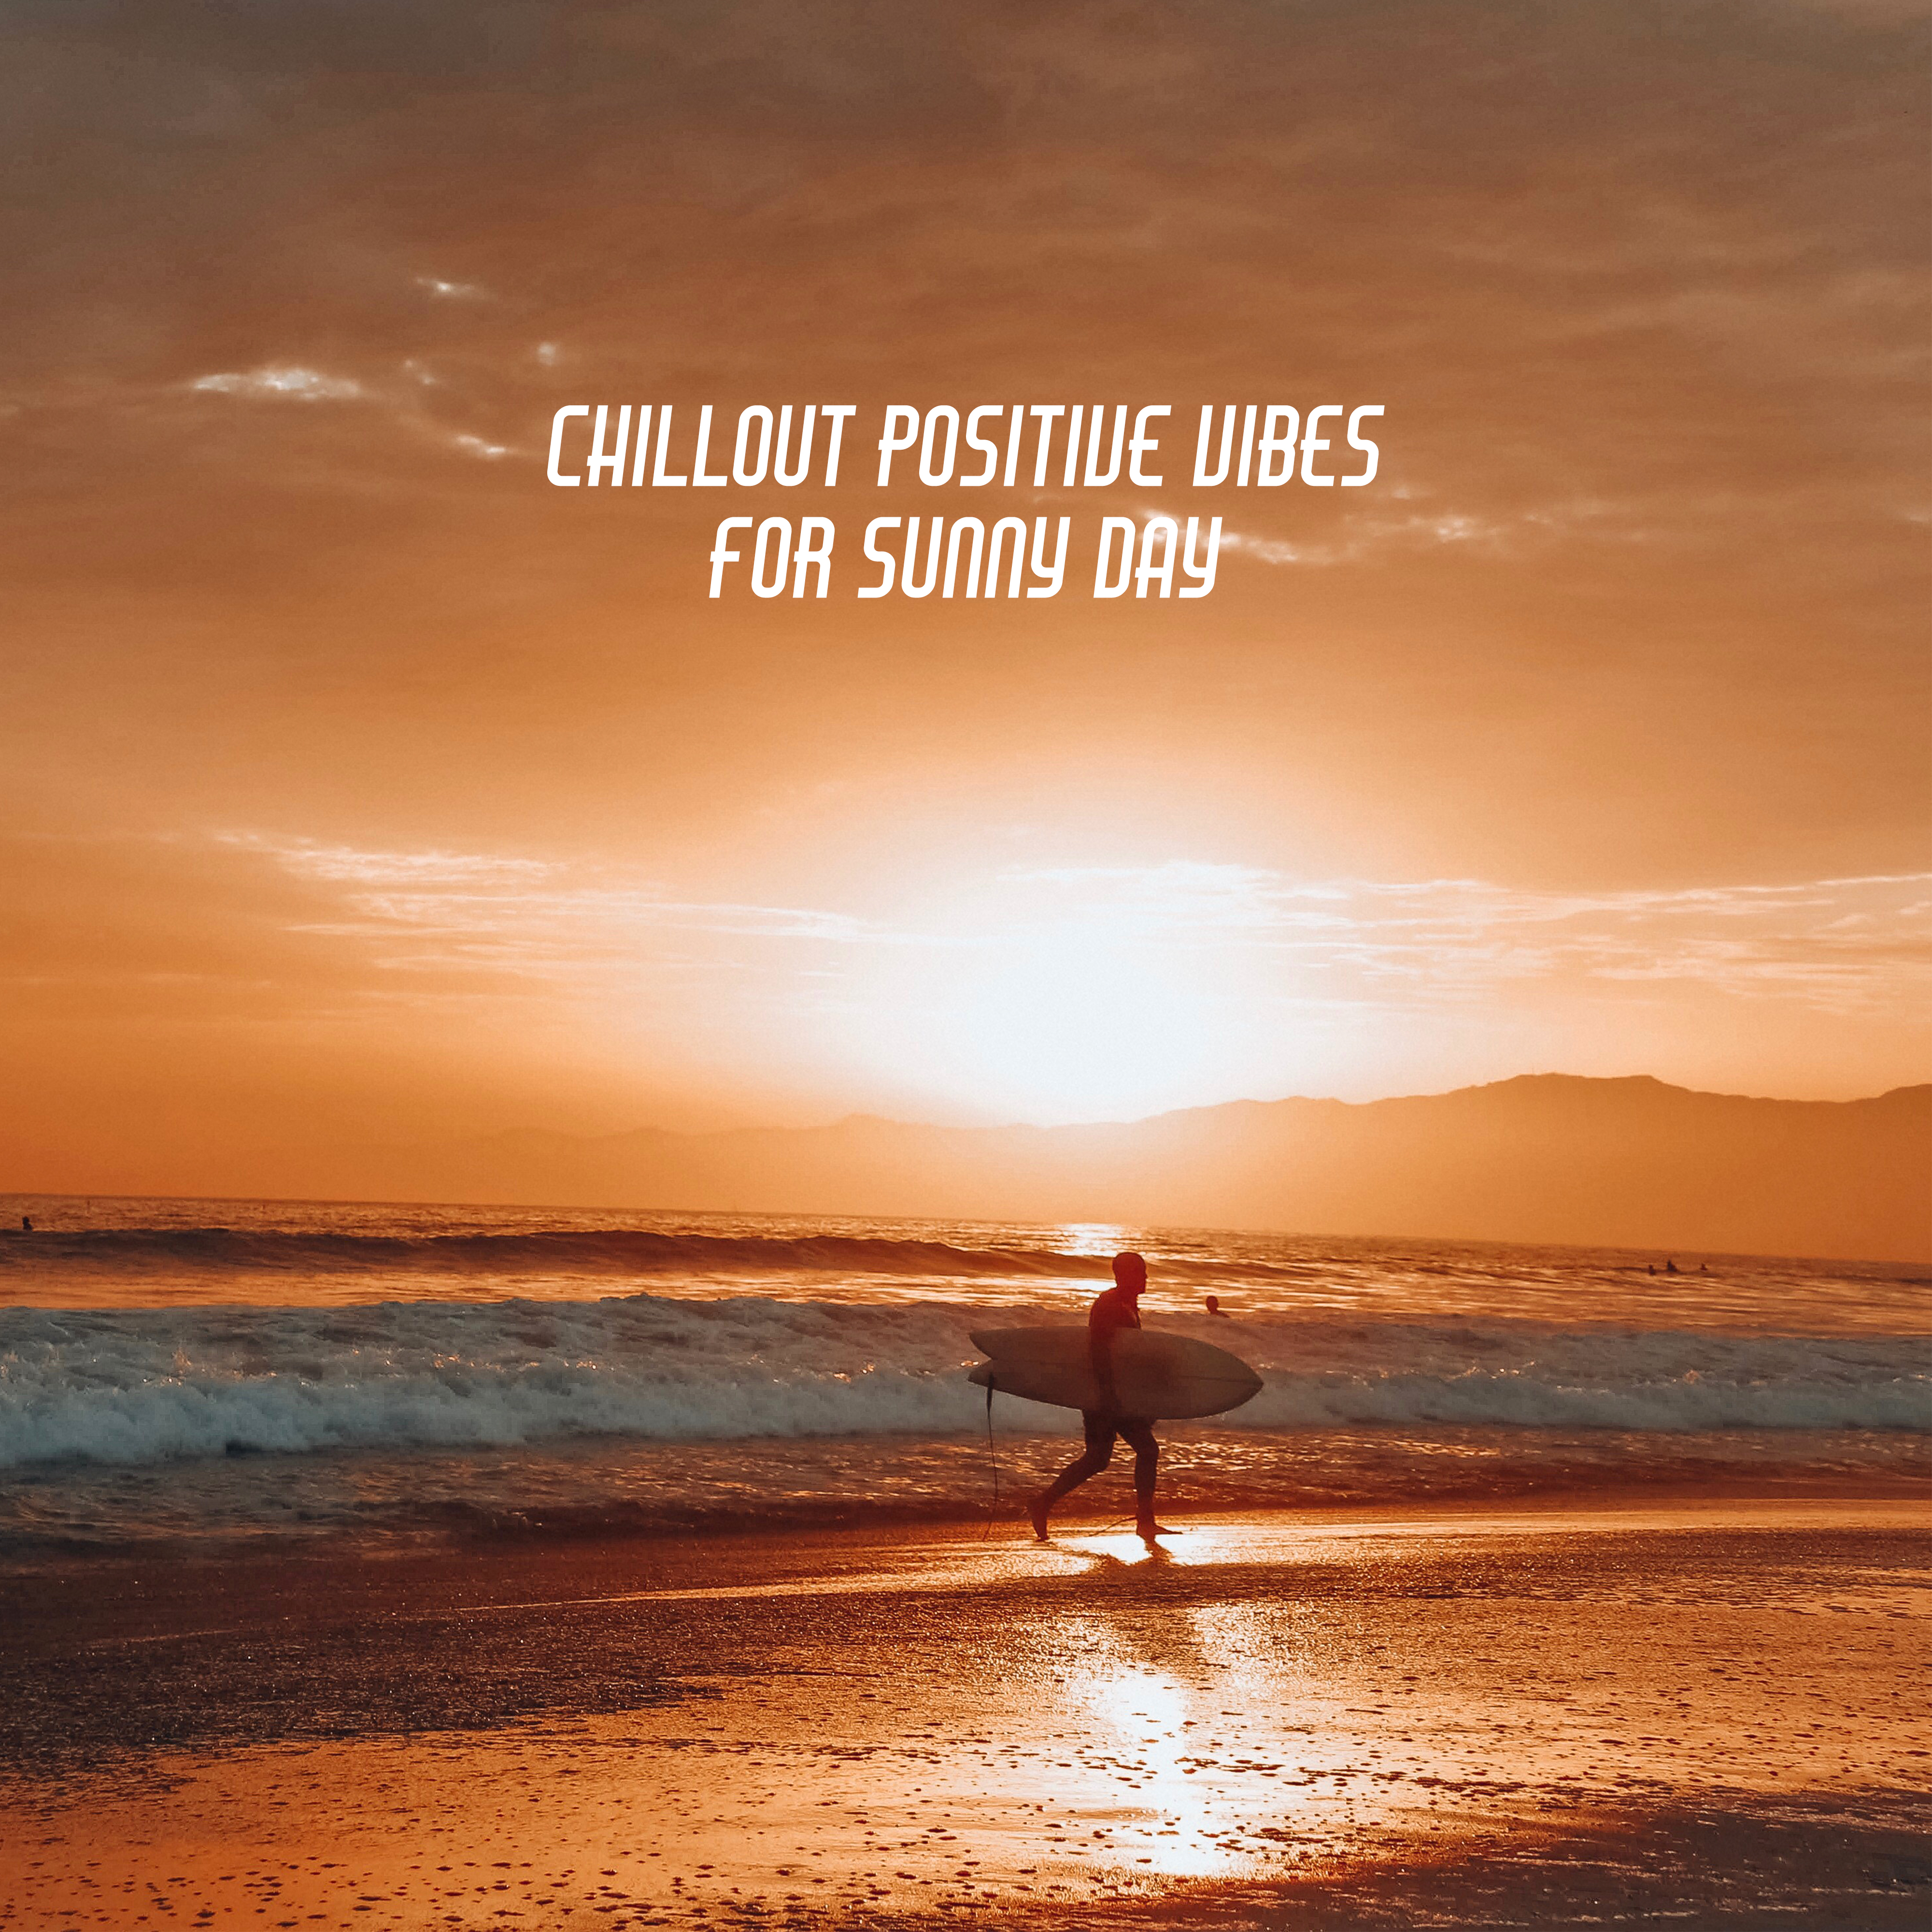 Chillout Positive Vibes for Sunny Day